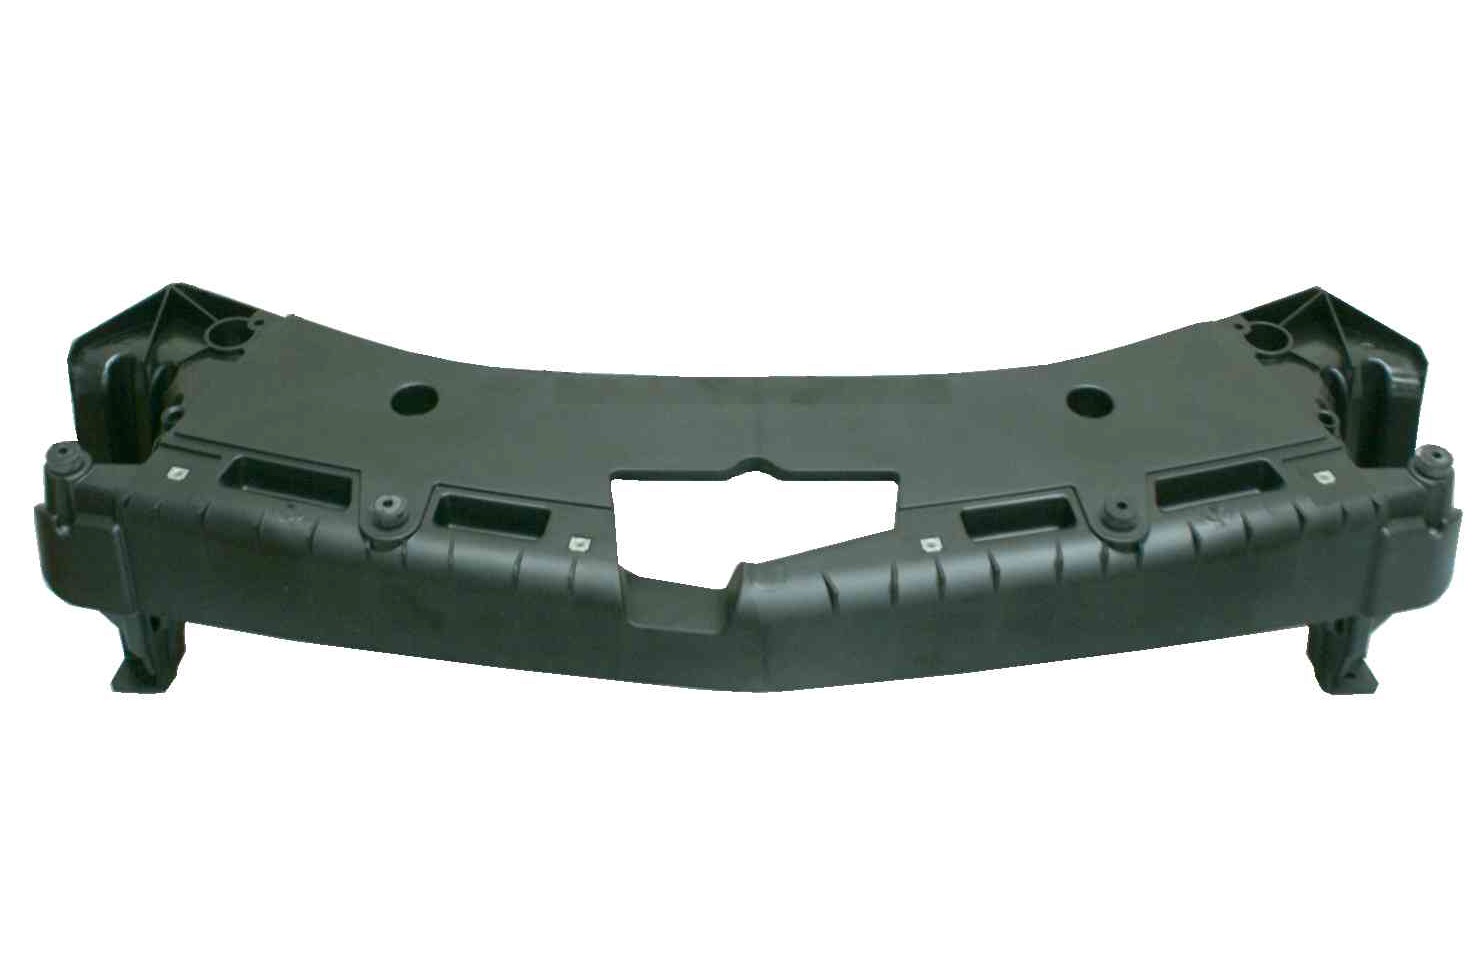 EQUINOX 10-17 Front UPPER Cover Support PLASTIC